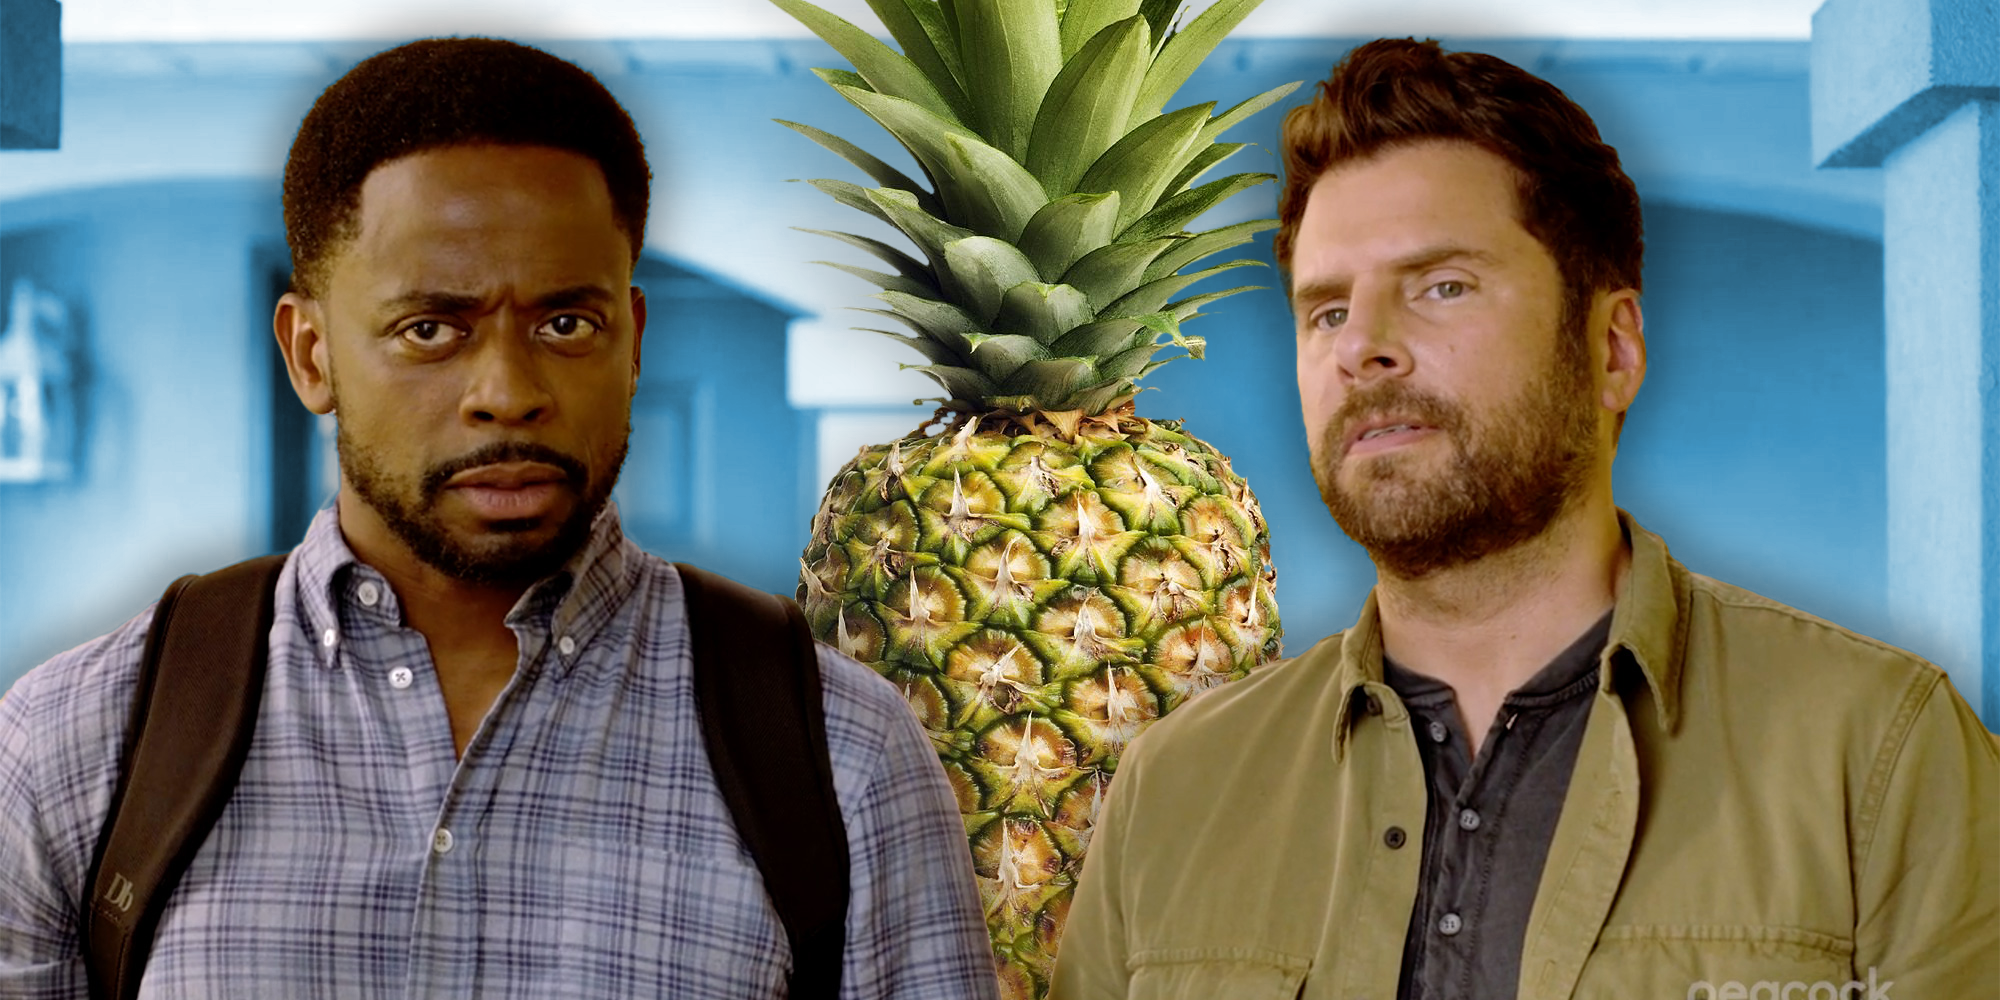 Shawn and Gus with a Pineapple.